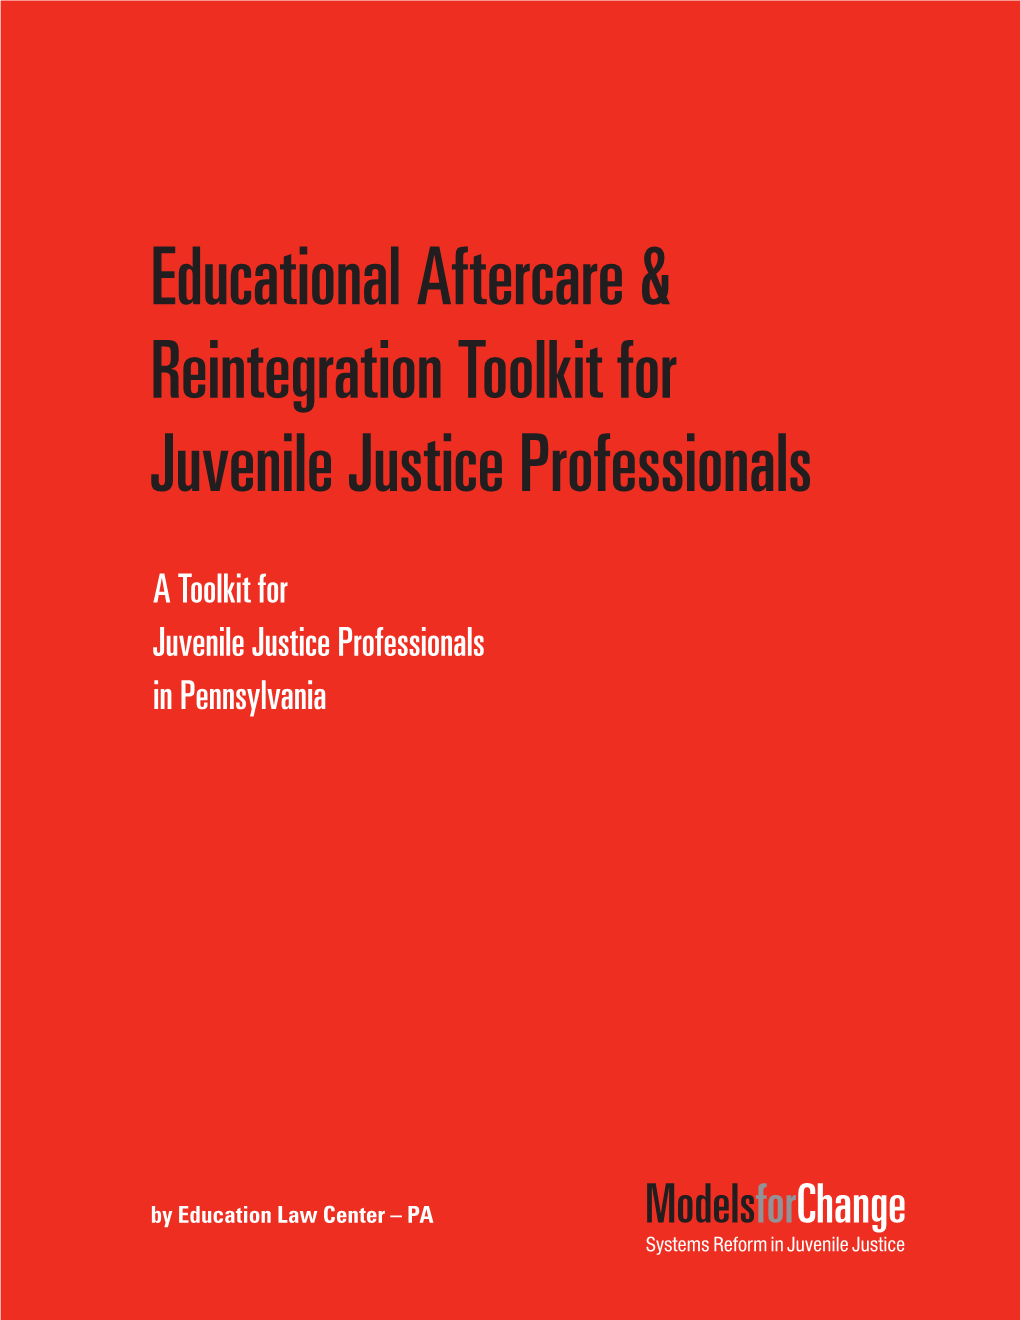 Educational Aftercare & Reintegration Toolkit for Juvenile Justice